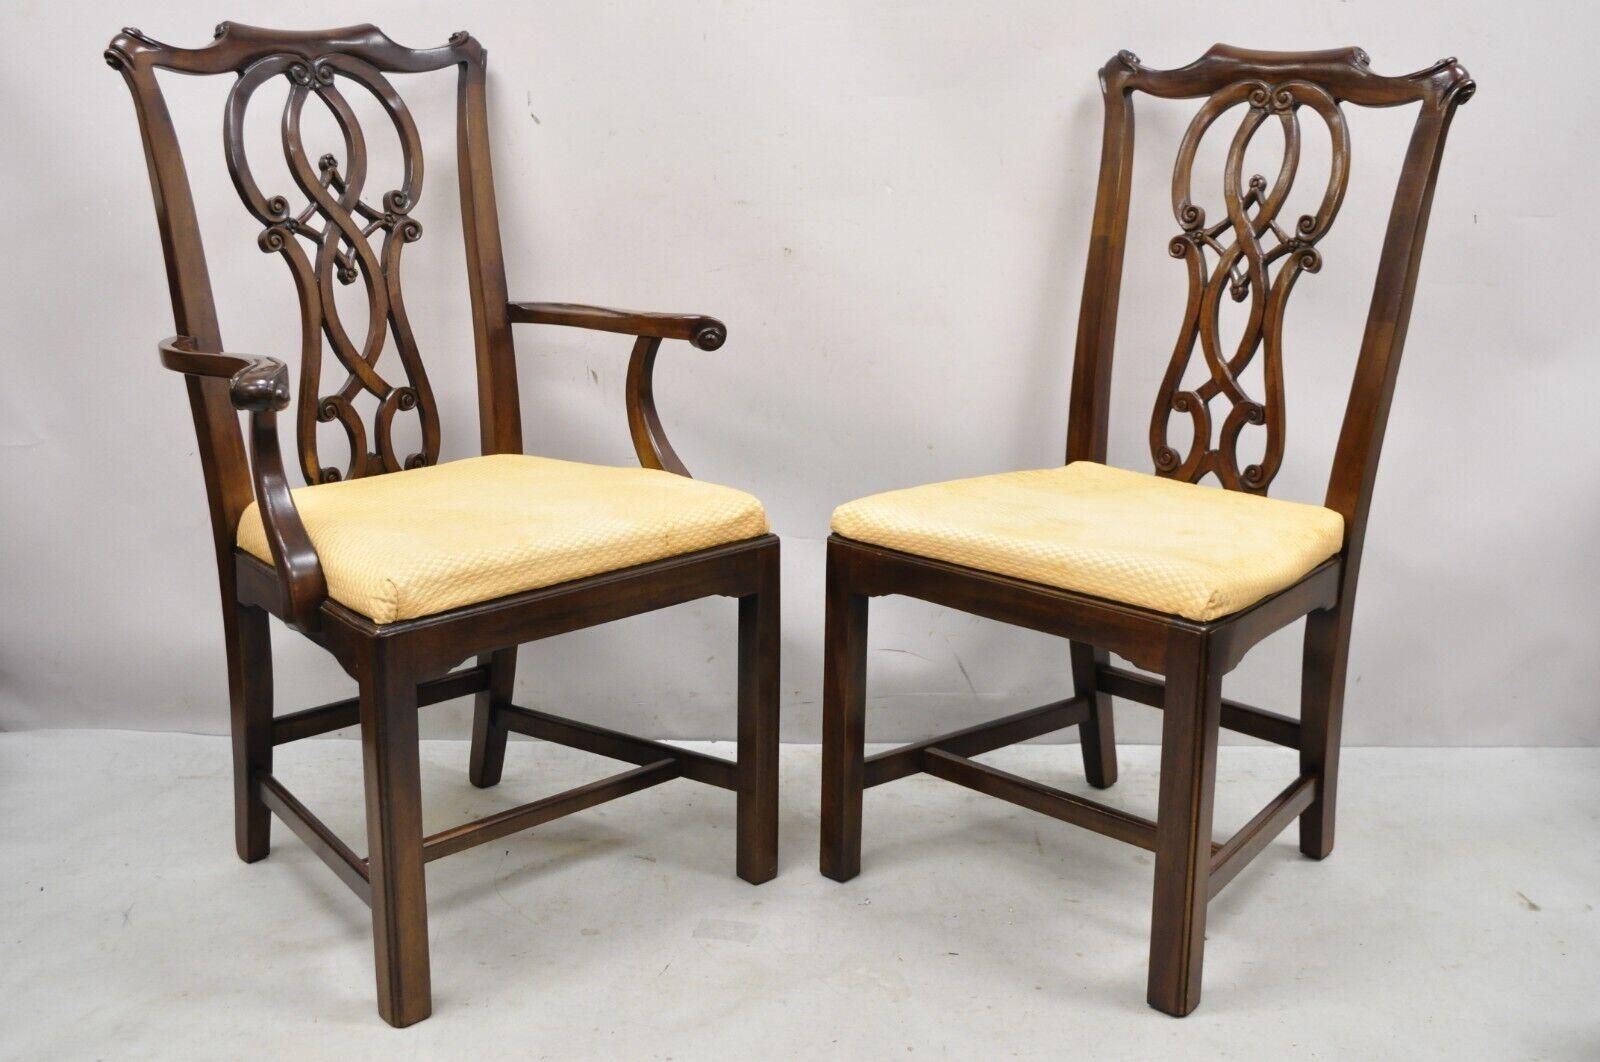 Drexel Heritage Chippendale Georgian style mahogany dining chairs - set of 6. Item features (2) armchairs, (4) side chairs, solid wood frames, beautiful wood grain, nicely carved details, original labels, very nice vintage set, quality American